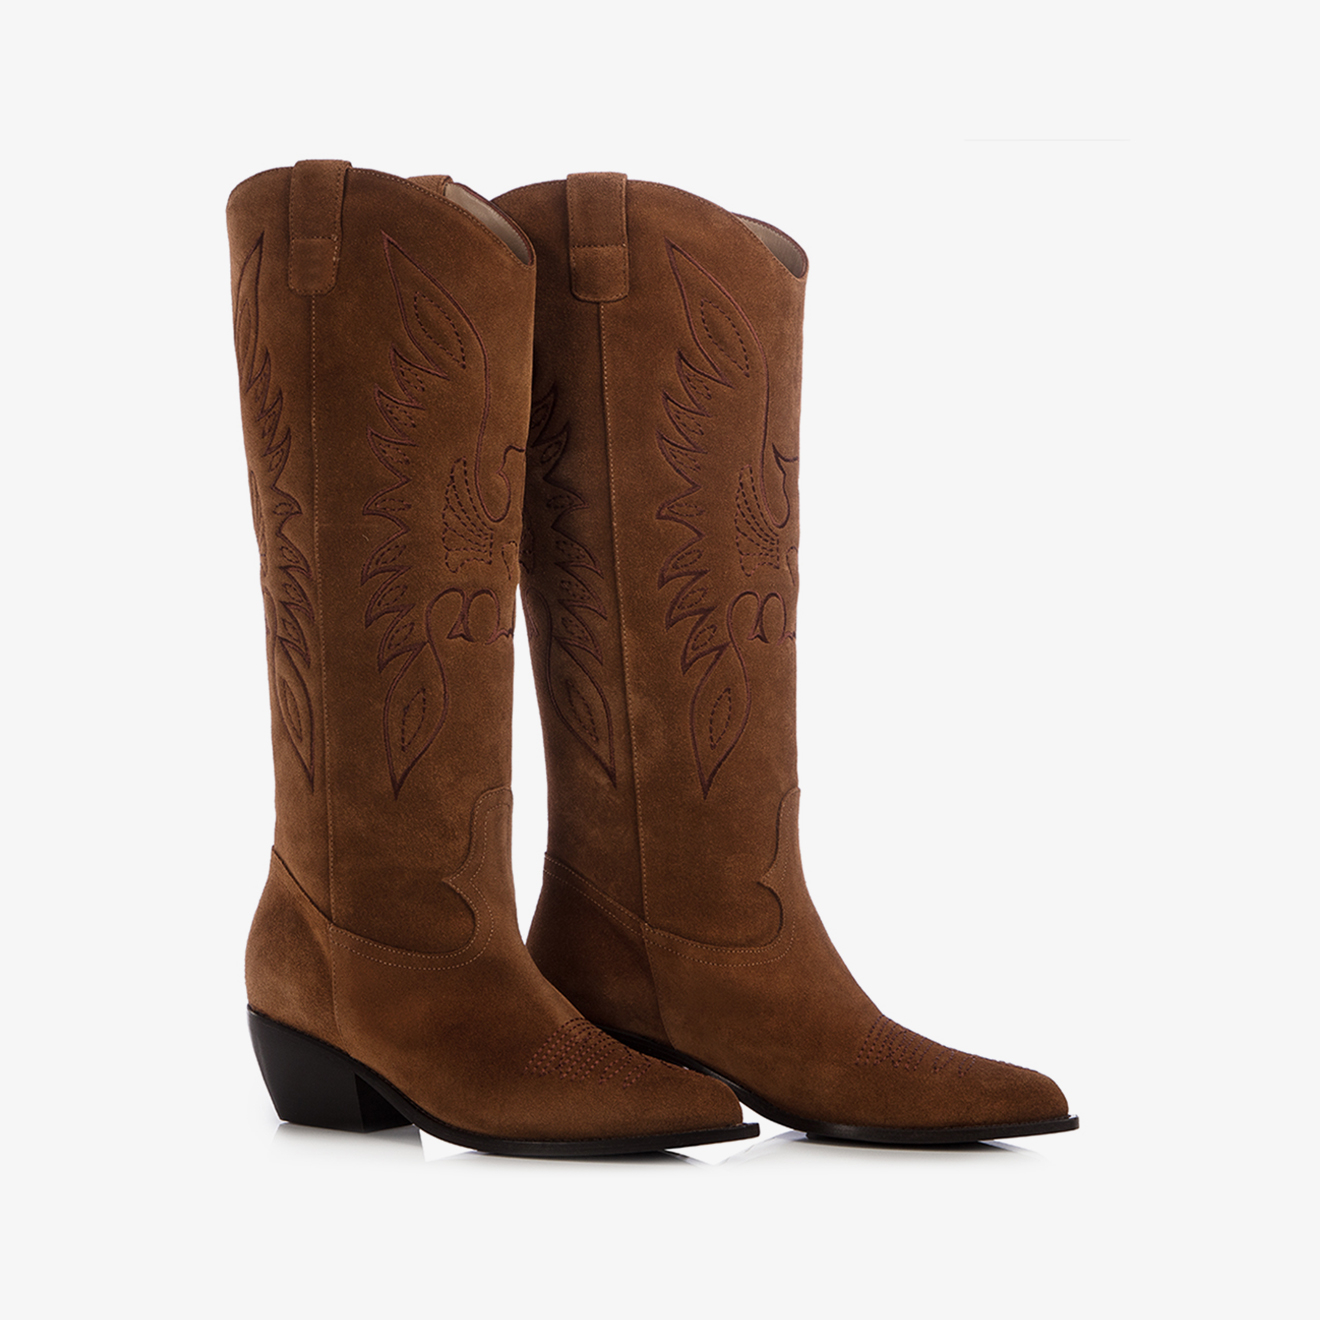 CHRISTINE COWBOY BOOT 70 mm - Le Silla official outlet